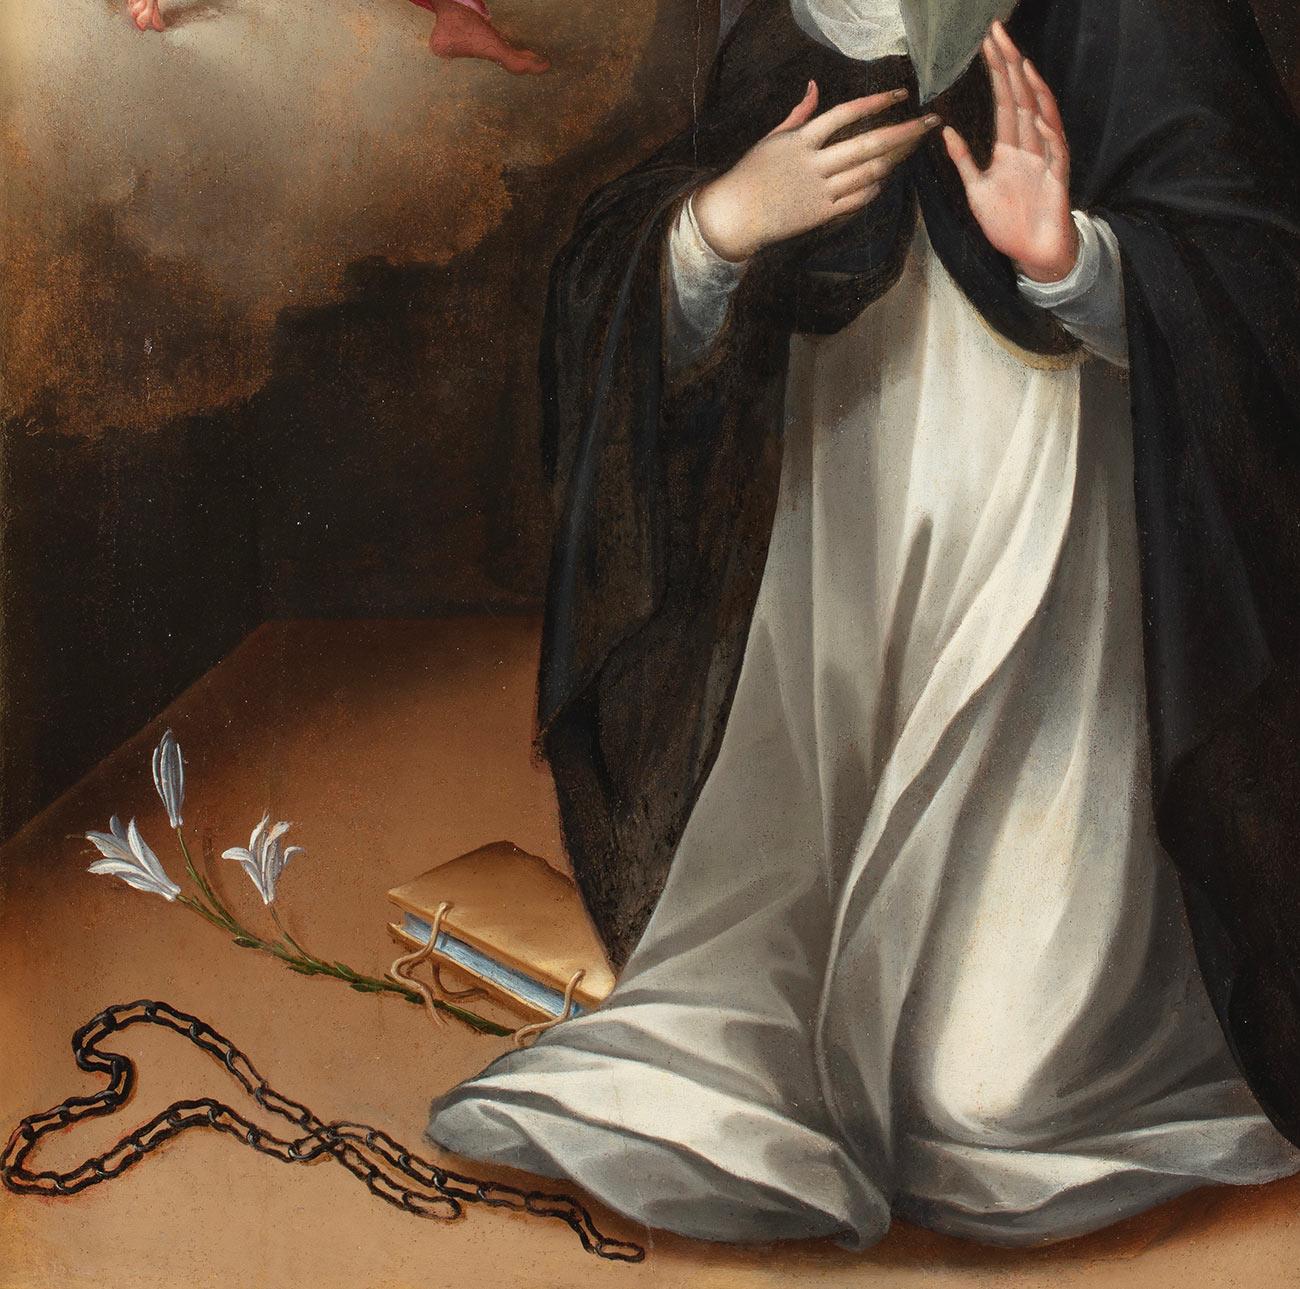 Cristofano Roncalli (Pomarance 1552 - Rome 1626)
Saint Catherine of Siena chooses the crown of thorns
oil on wood, cm. 101,5x59.5 - with frame cm. 120x76
Shaped, carved and sculpted wooden cassetta frame, partly gilded and partly ebonized